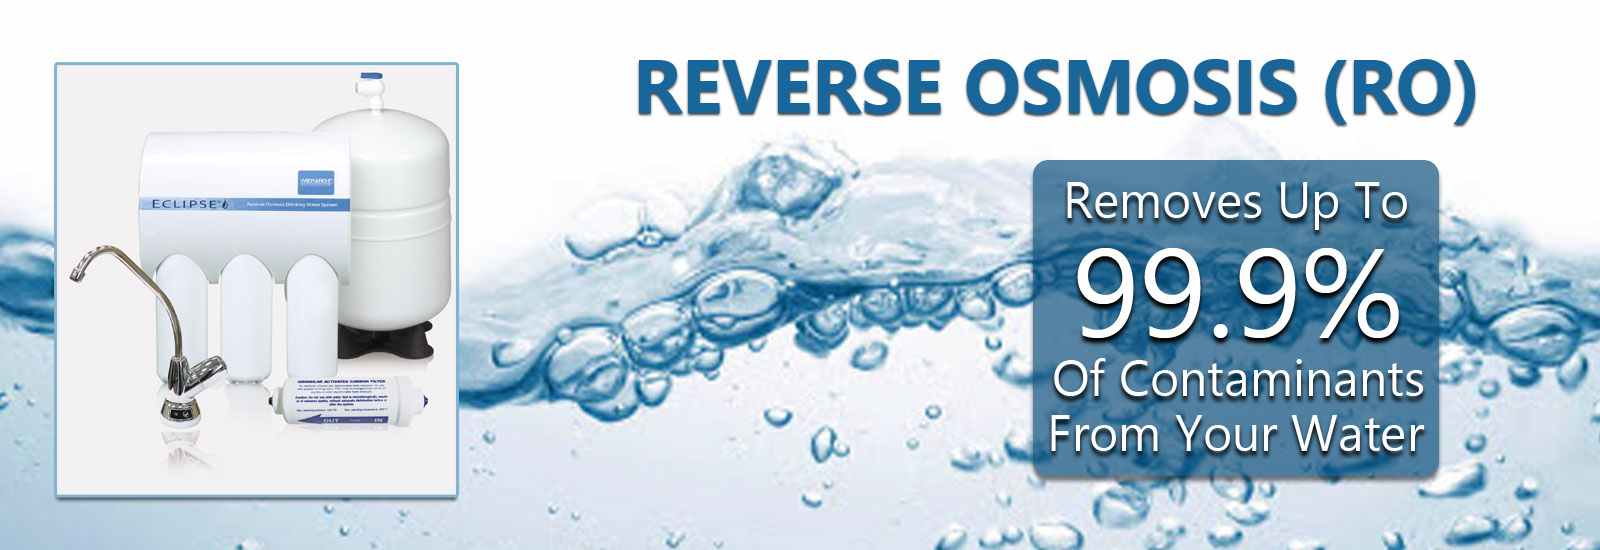 Reverse Osmosis System Options